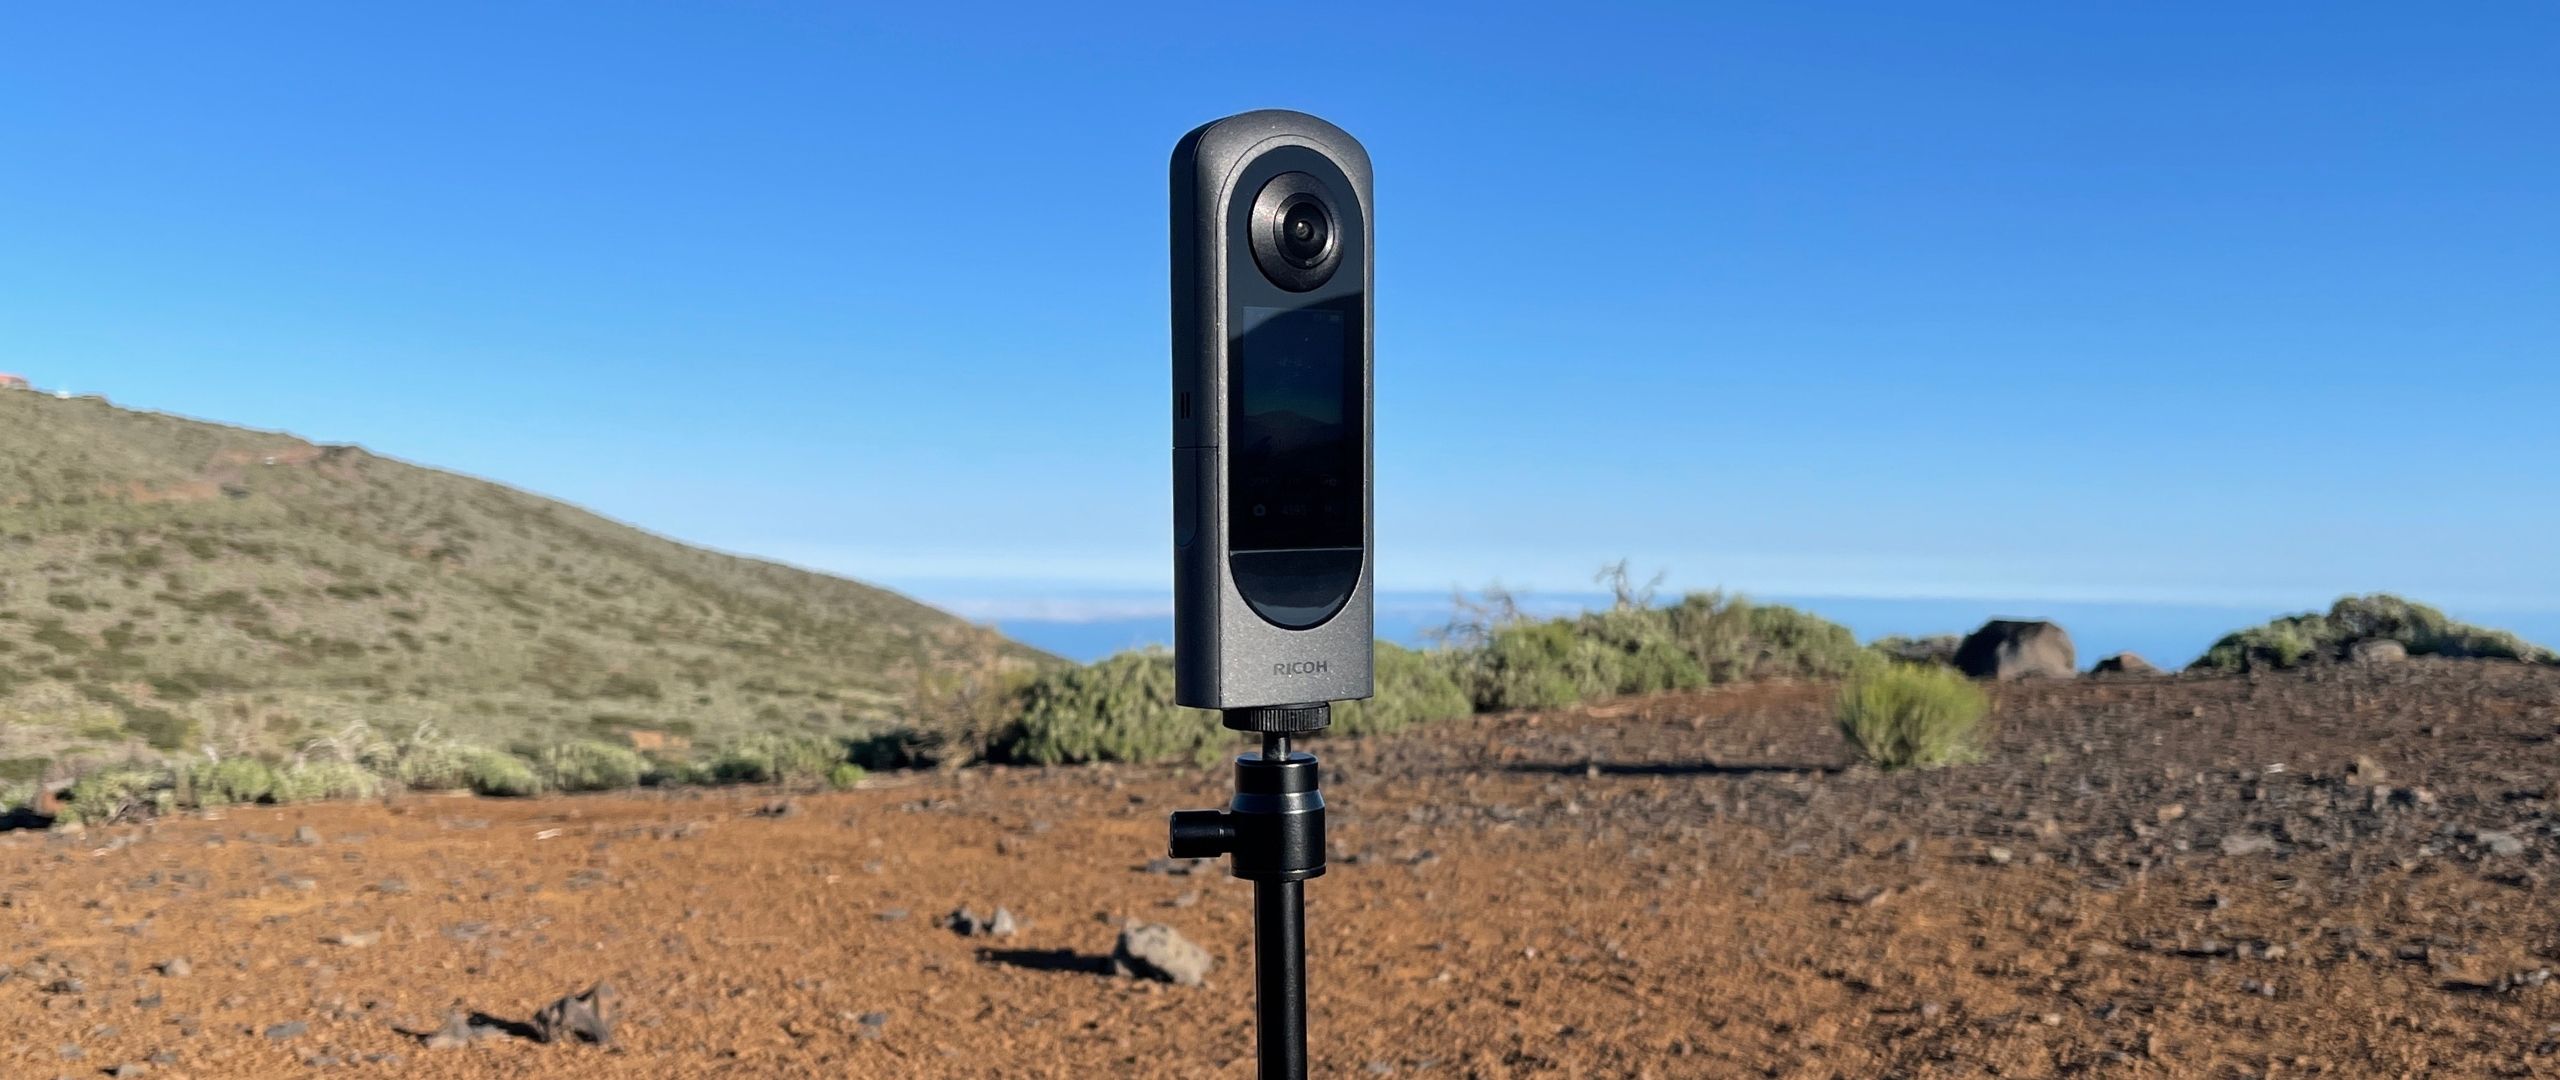 Ricoh Theta X review: 60.5MP stills, 5.7K 360° video and image